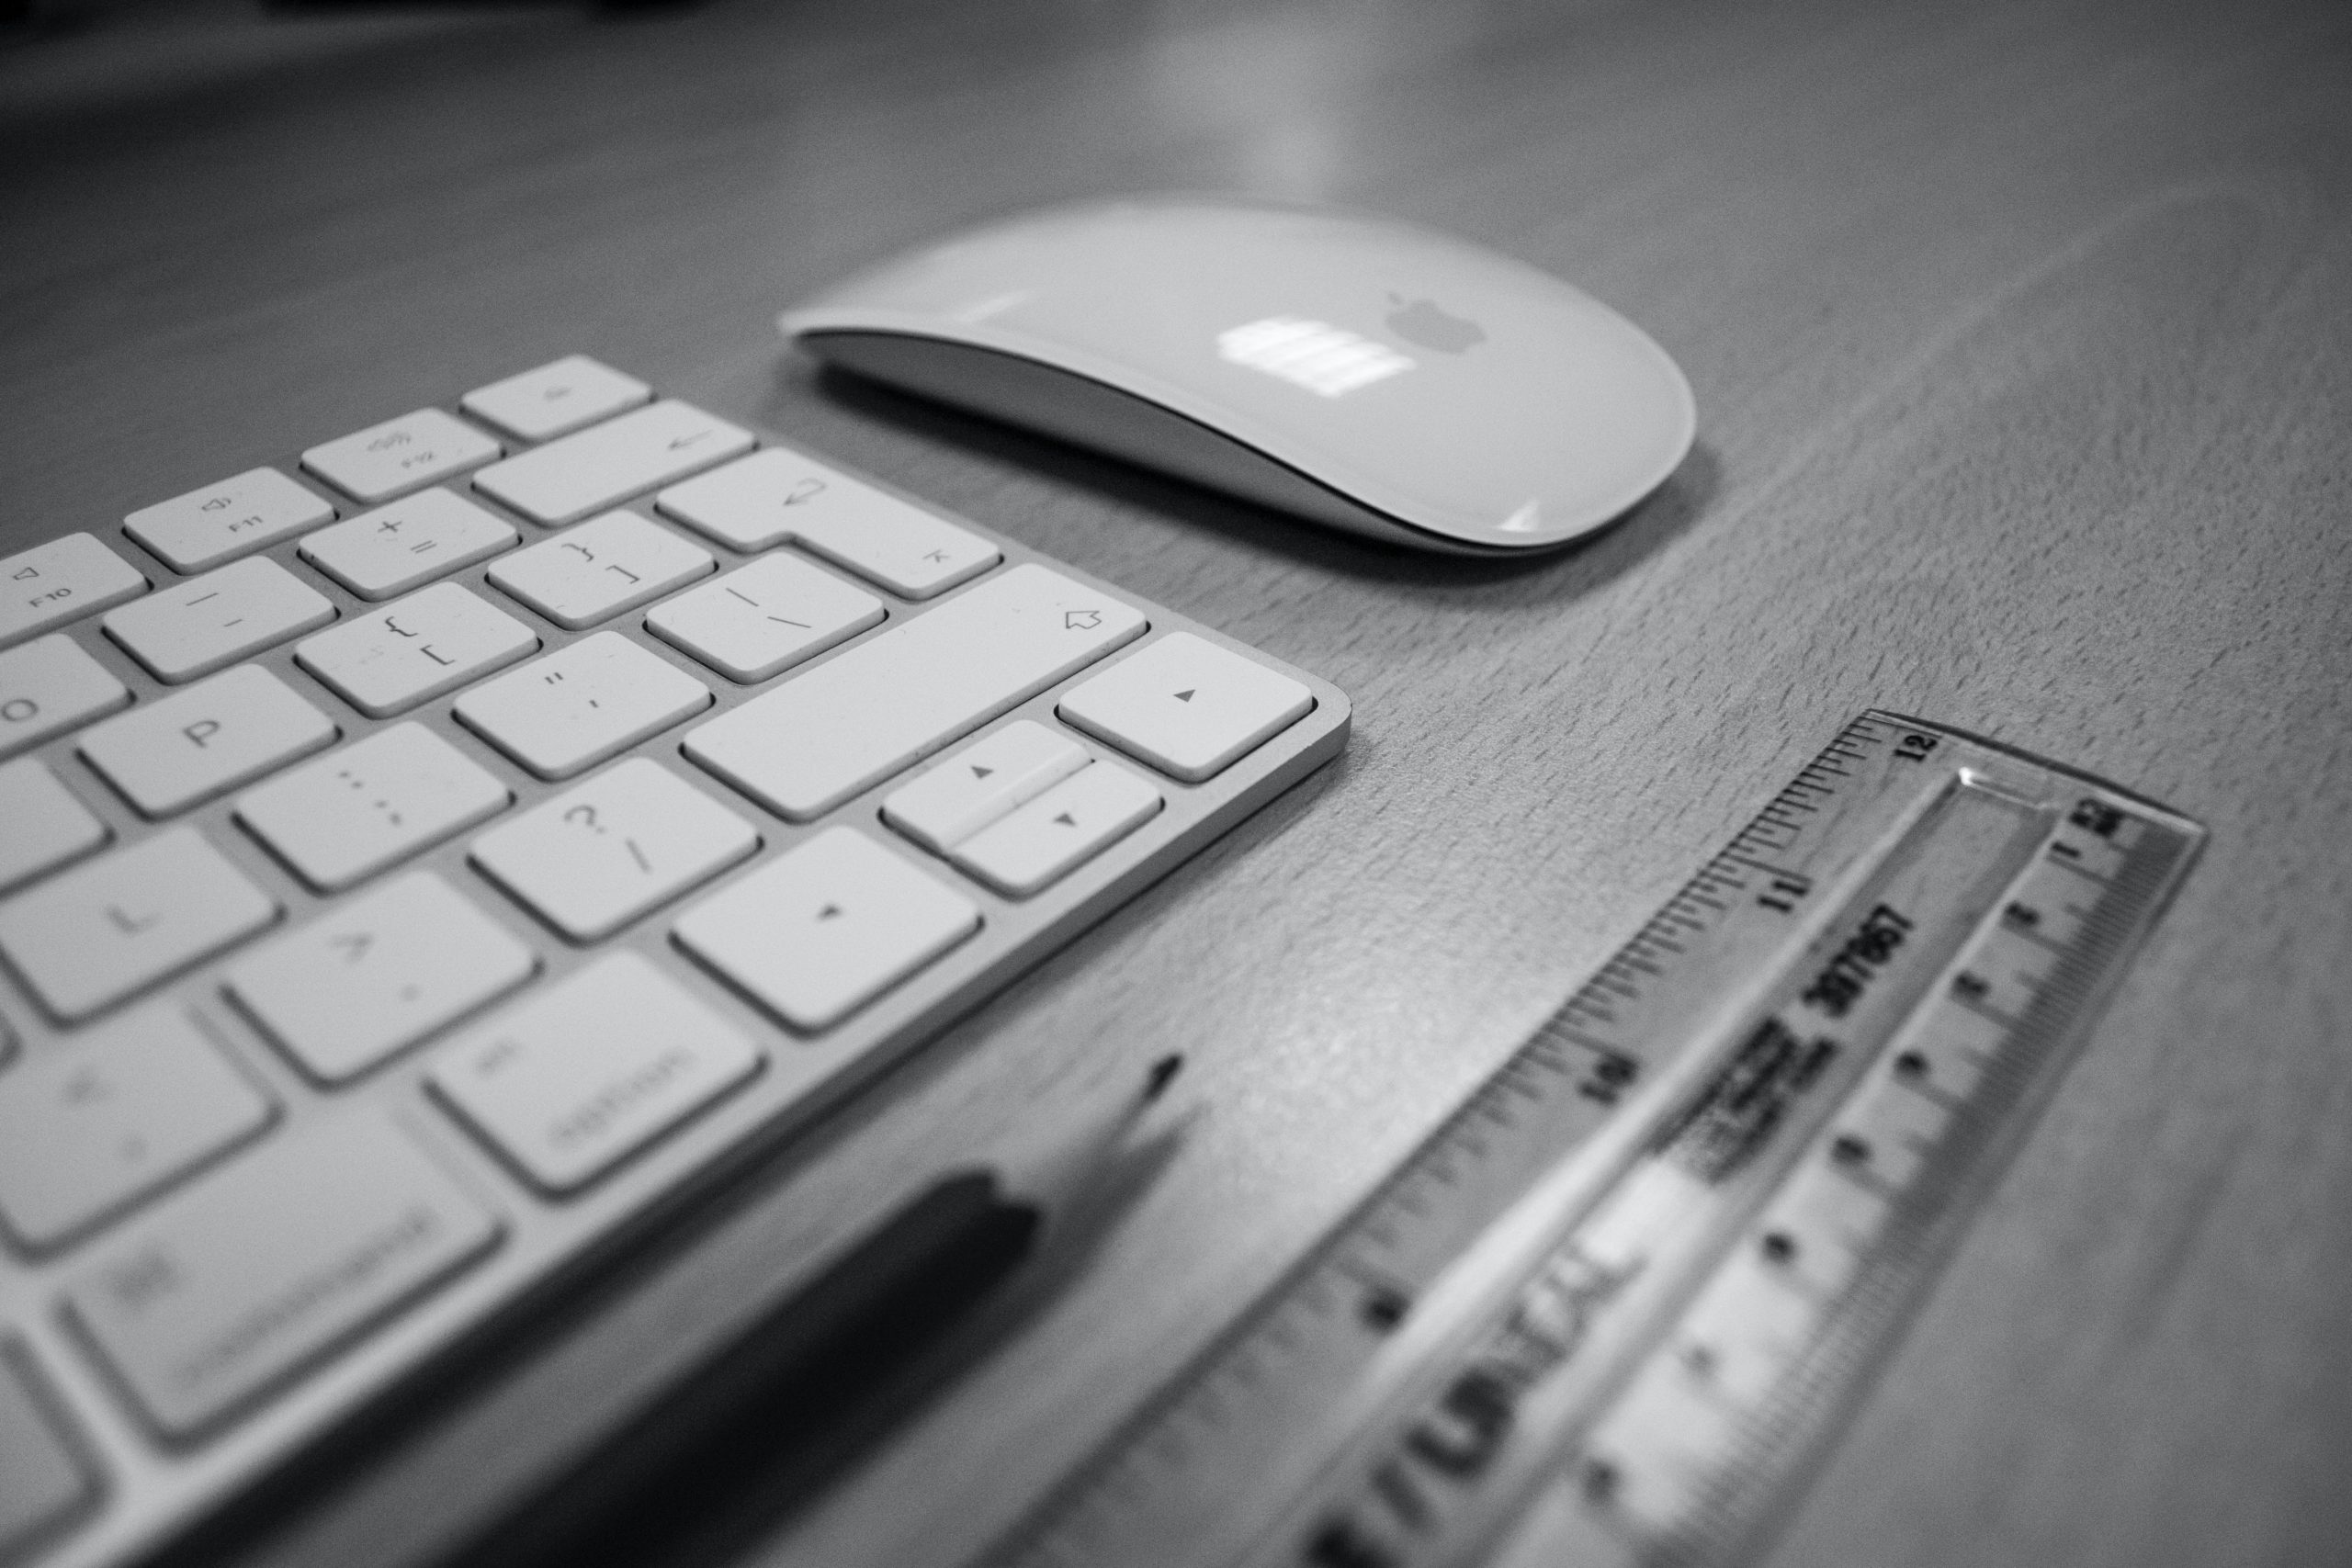 black and white image of a computer keyboard, mouse, ruler, and pencil sitting on a desk